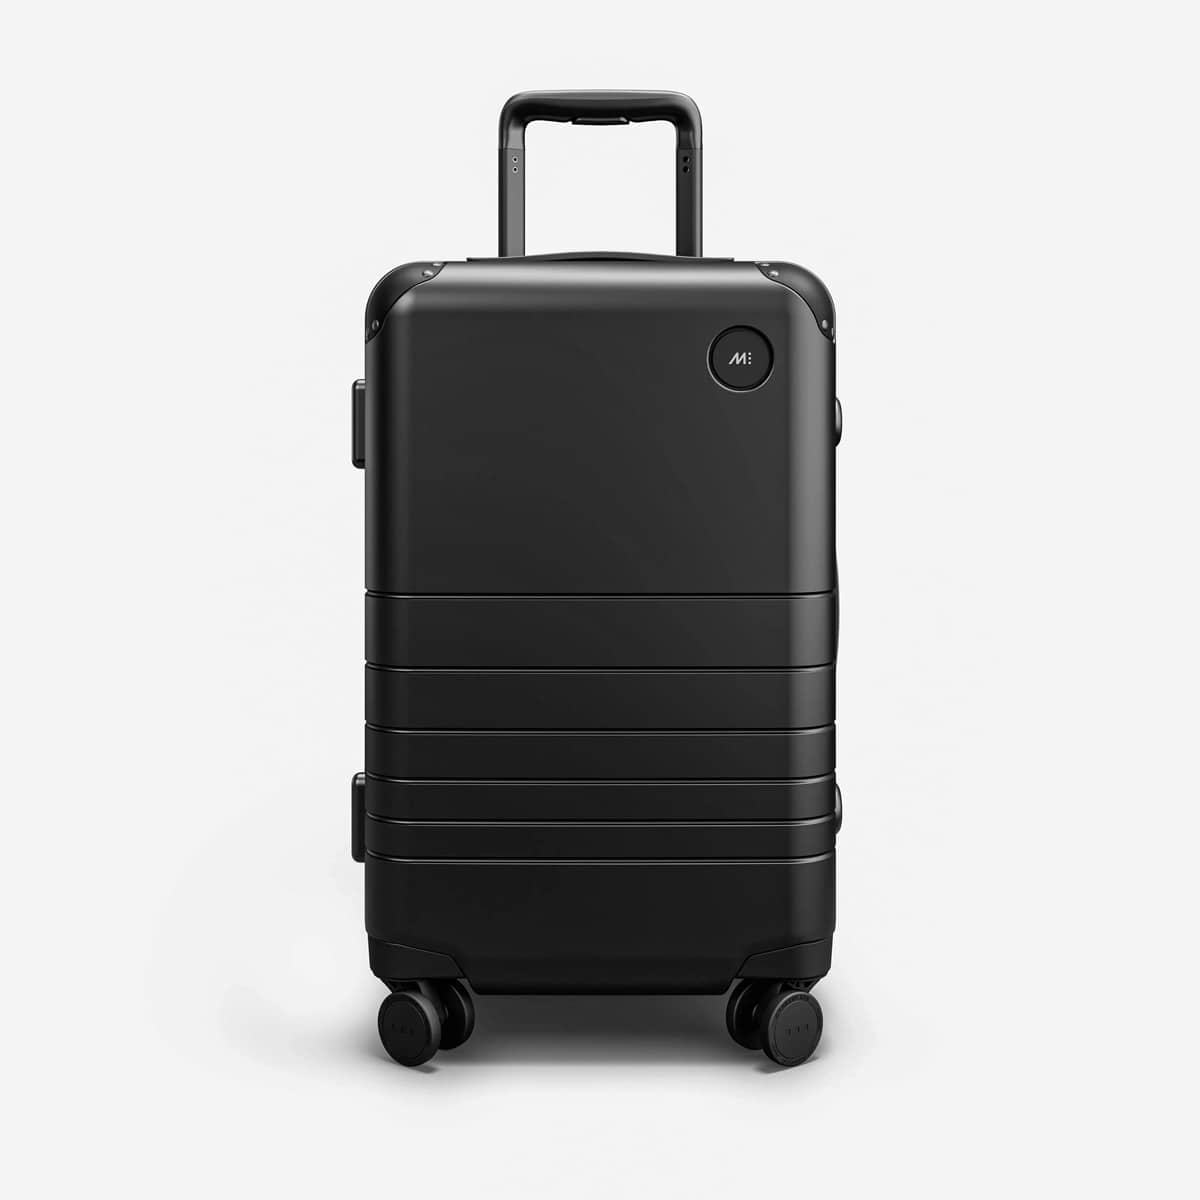 Perfect carry-on suitcase for business travelers